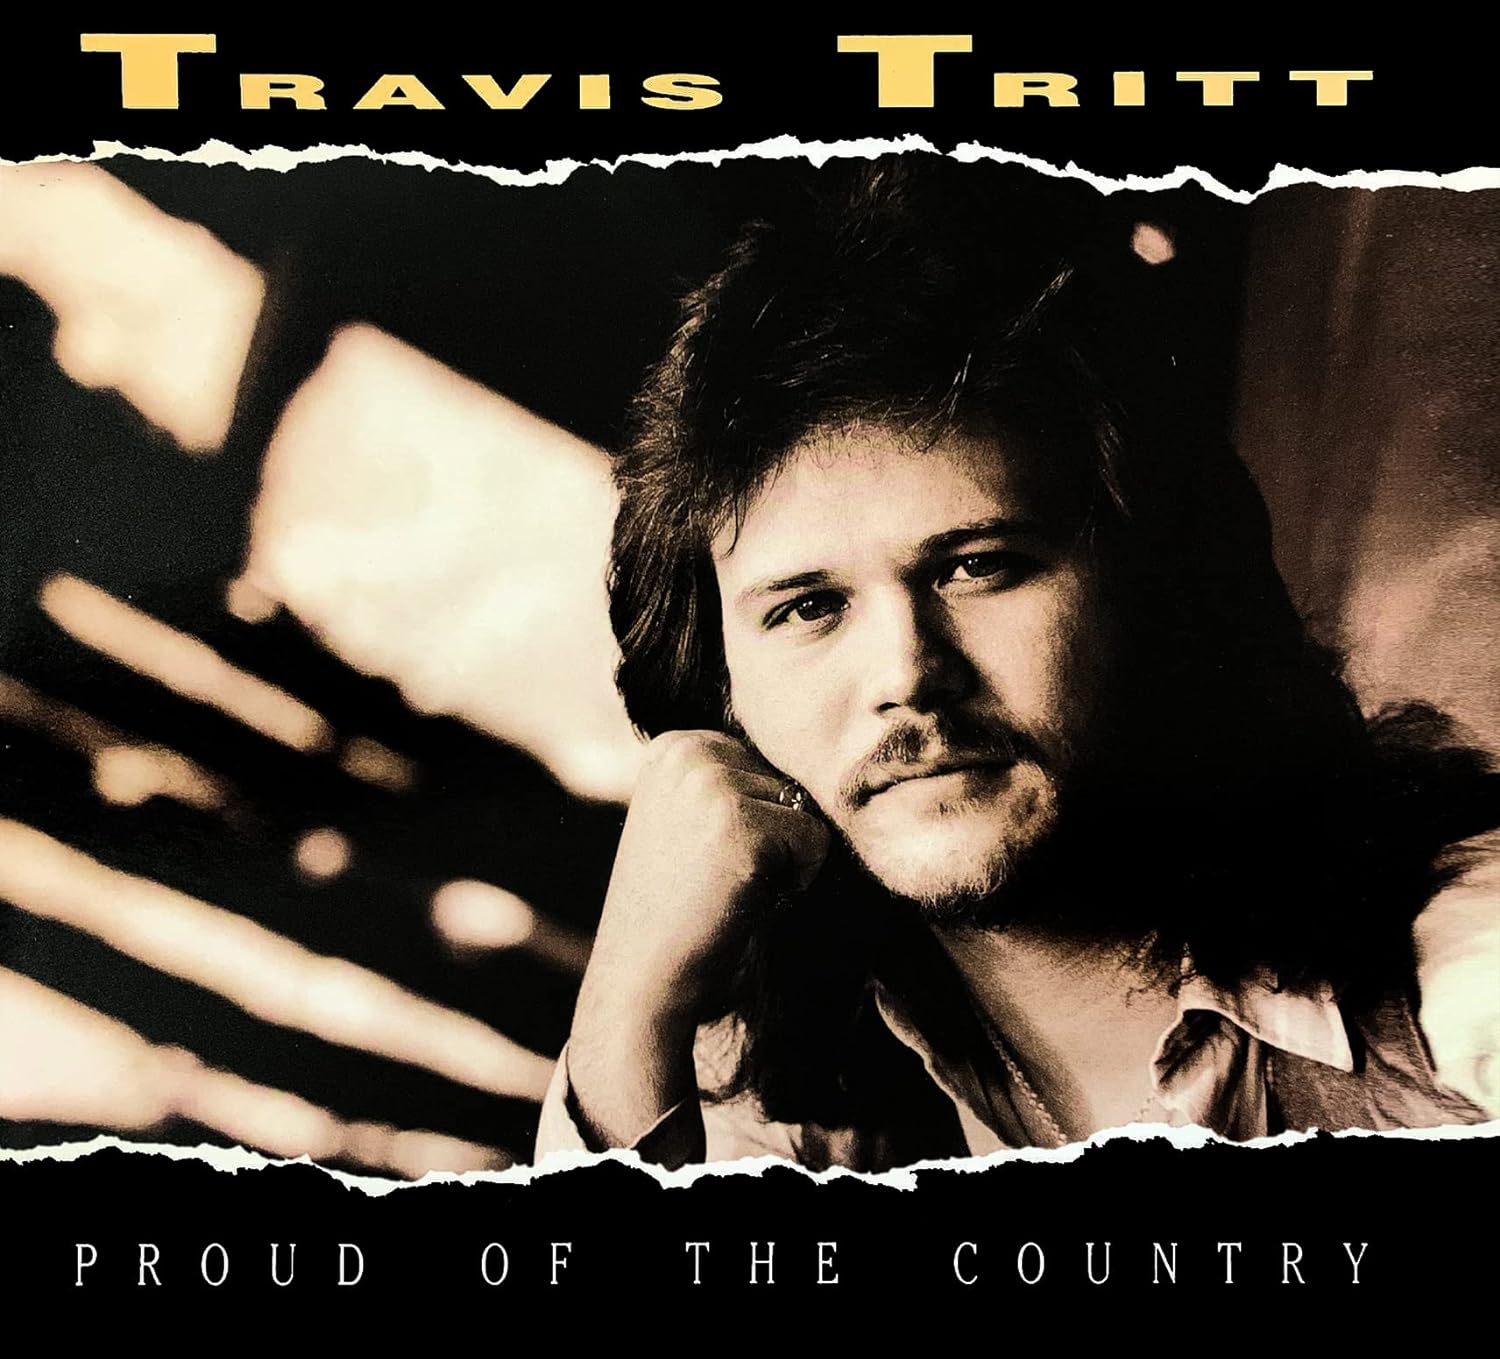 Travis Tritt – Proud of the Country